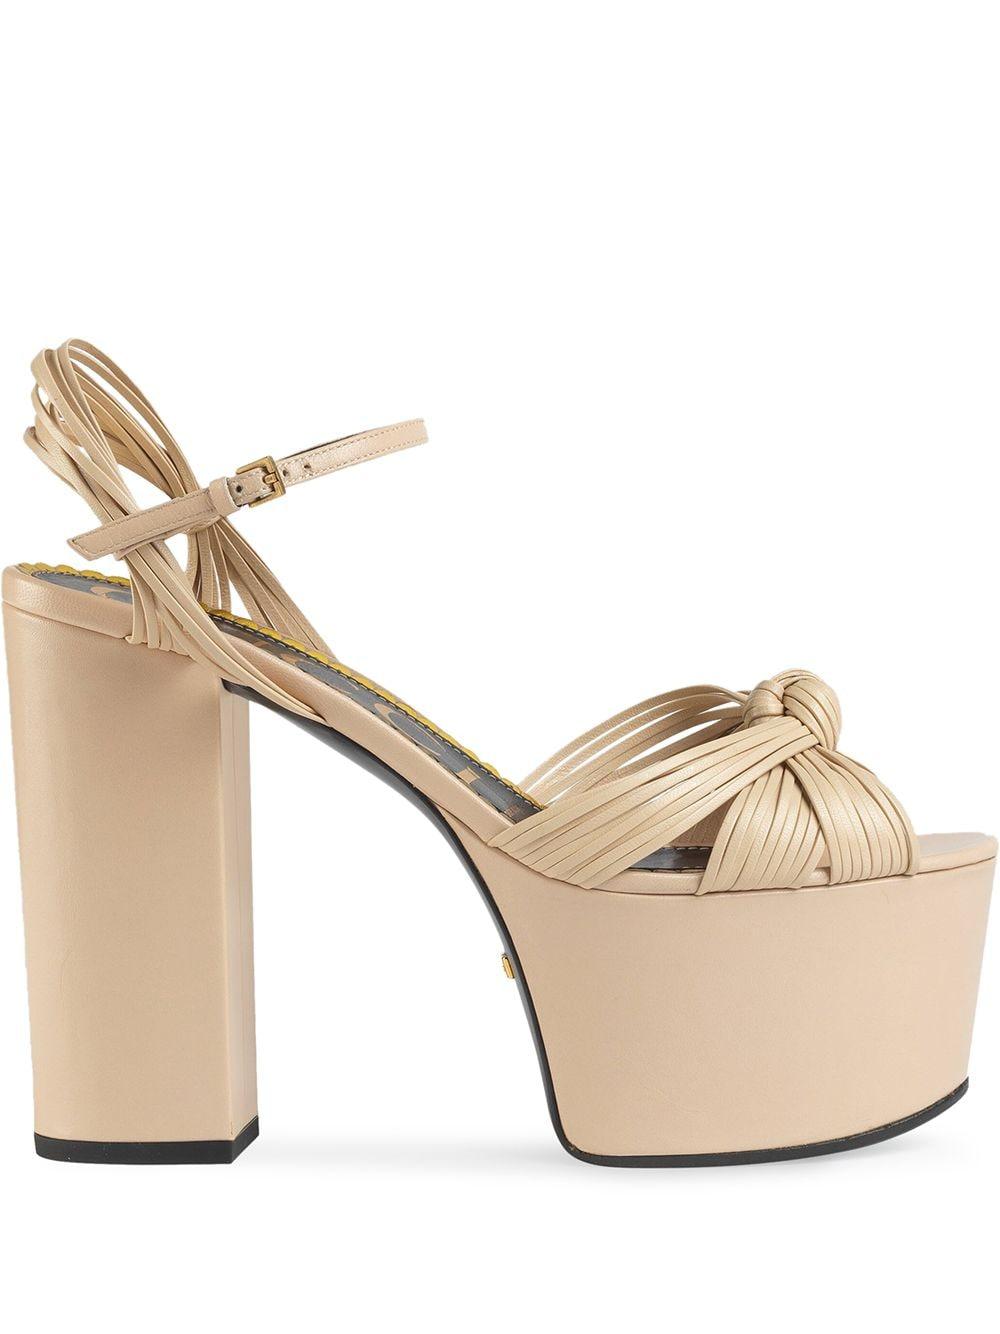 Tacones Gucci Plataforma Low Prices, 56% OFF | fames.org.br